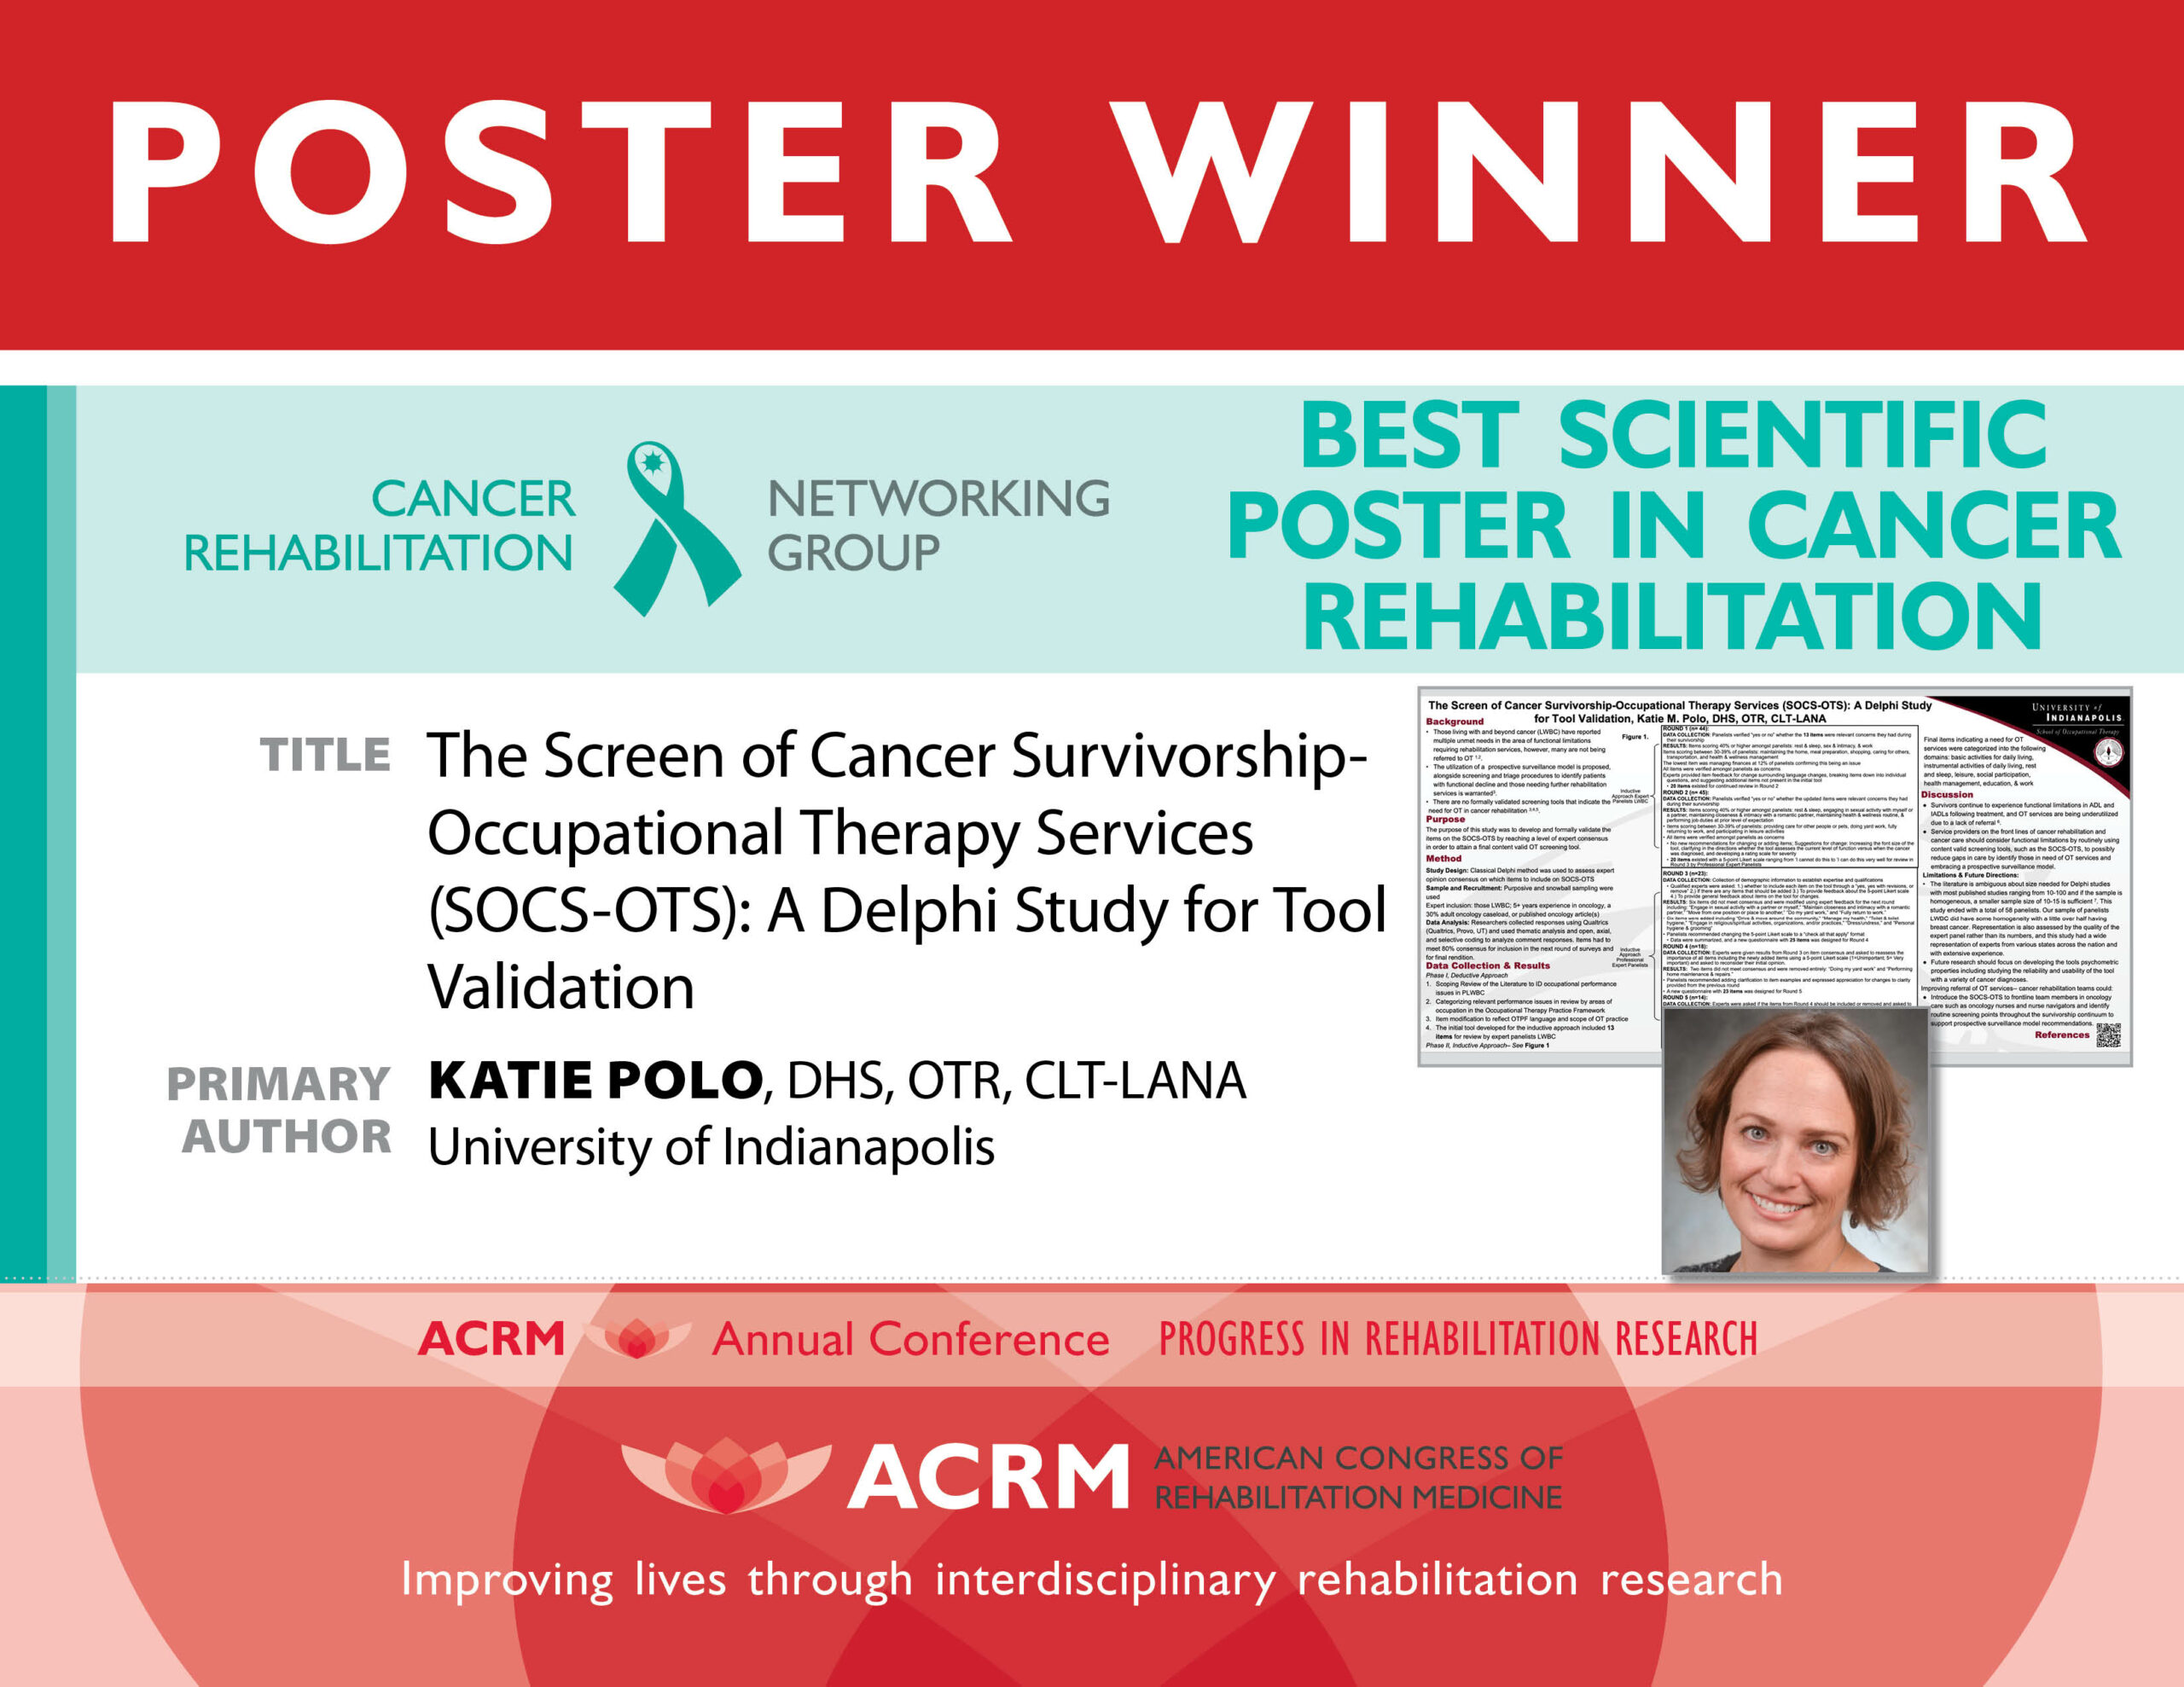 ACRM 2021 Best Poster in Cancer Rehabilitation - image